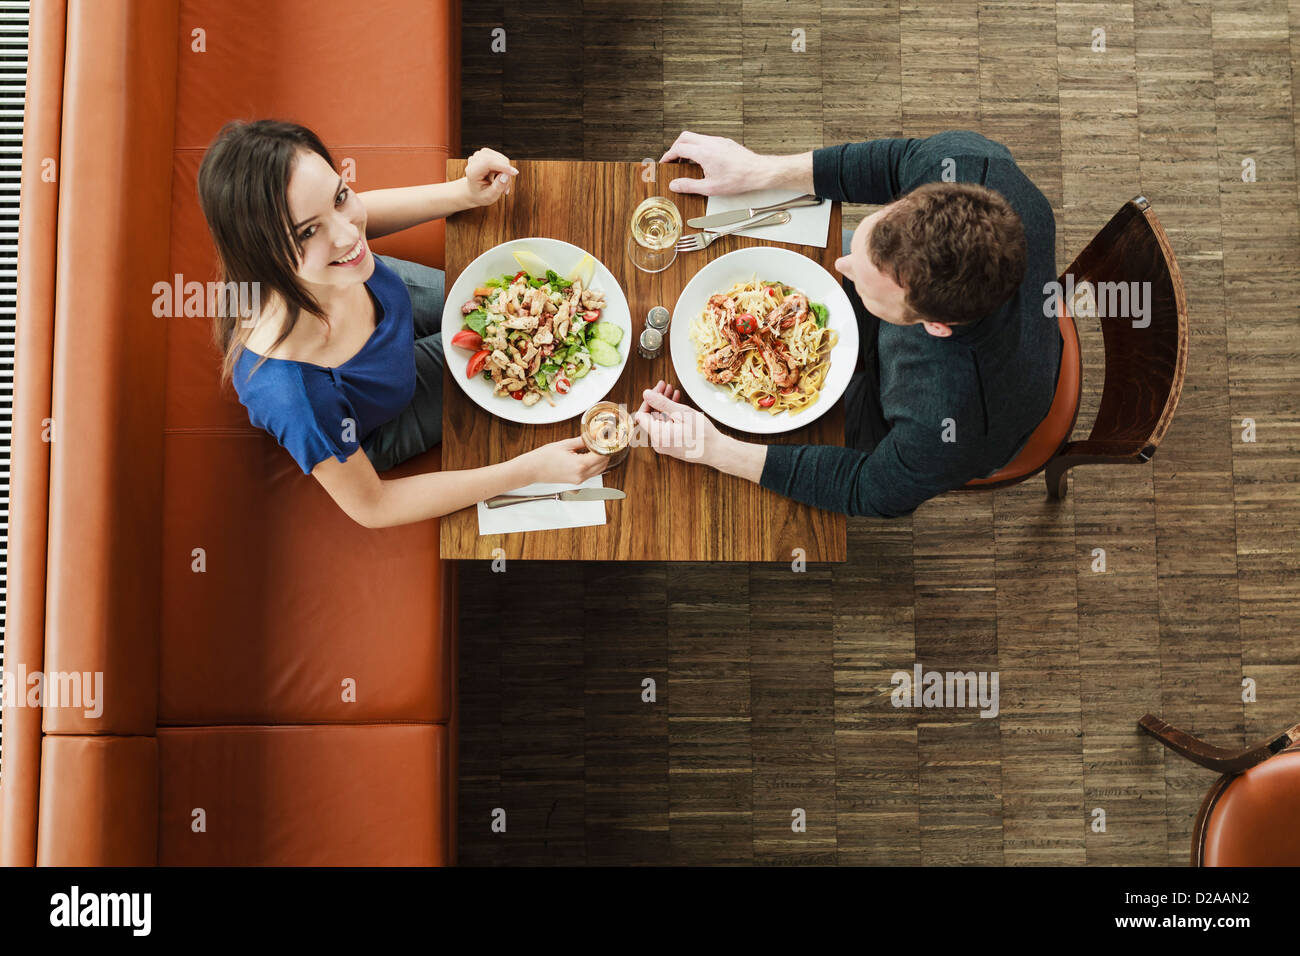 Couple having lunch at cafe Stock Photo